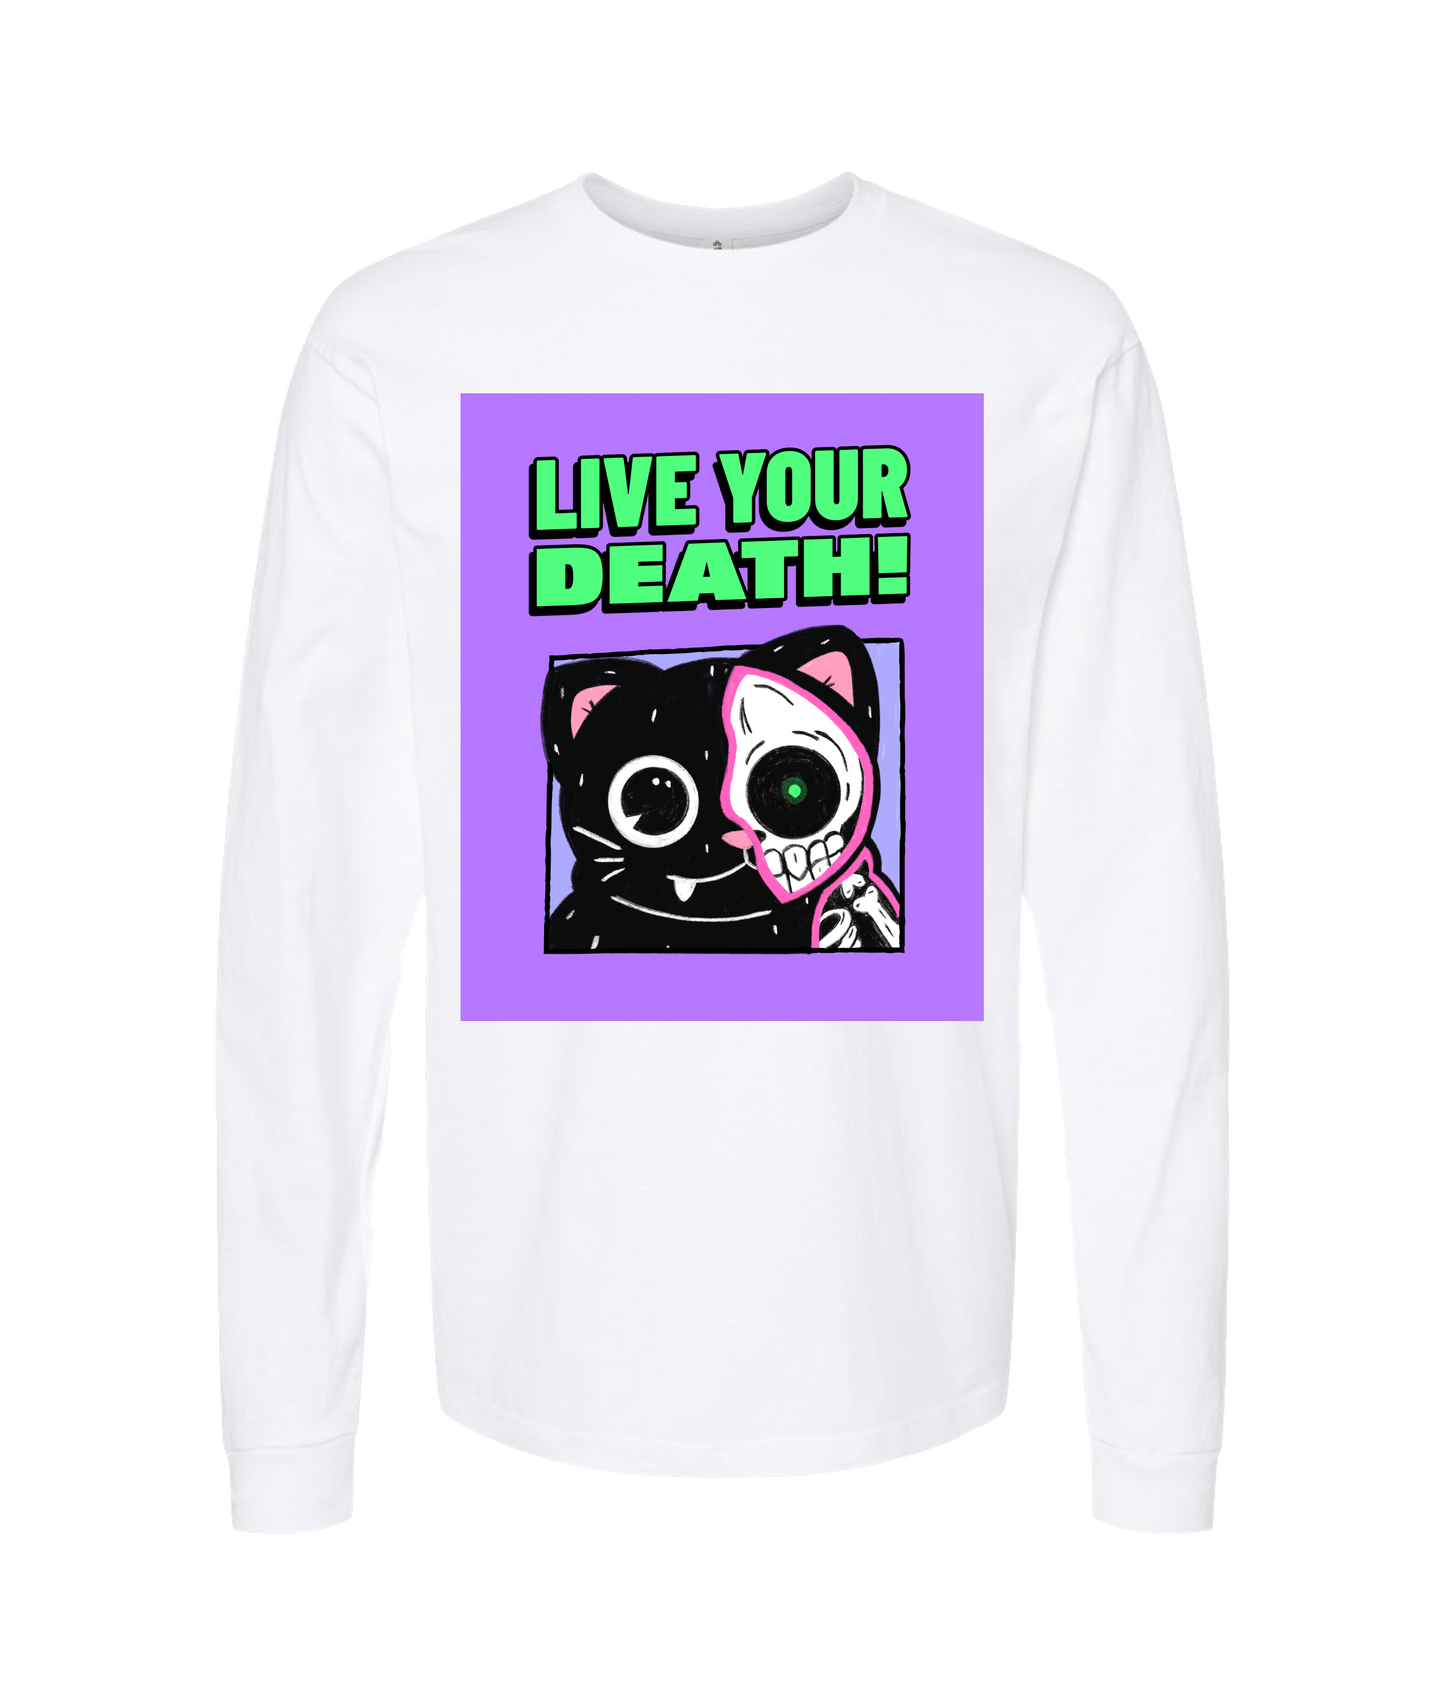 Live Your Death - DESIGN 2 - White Long Sleeve T